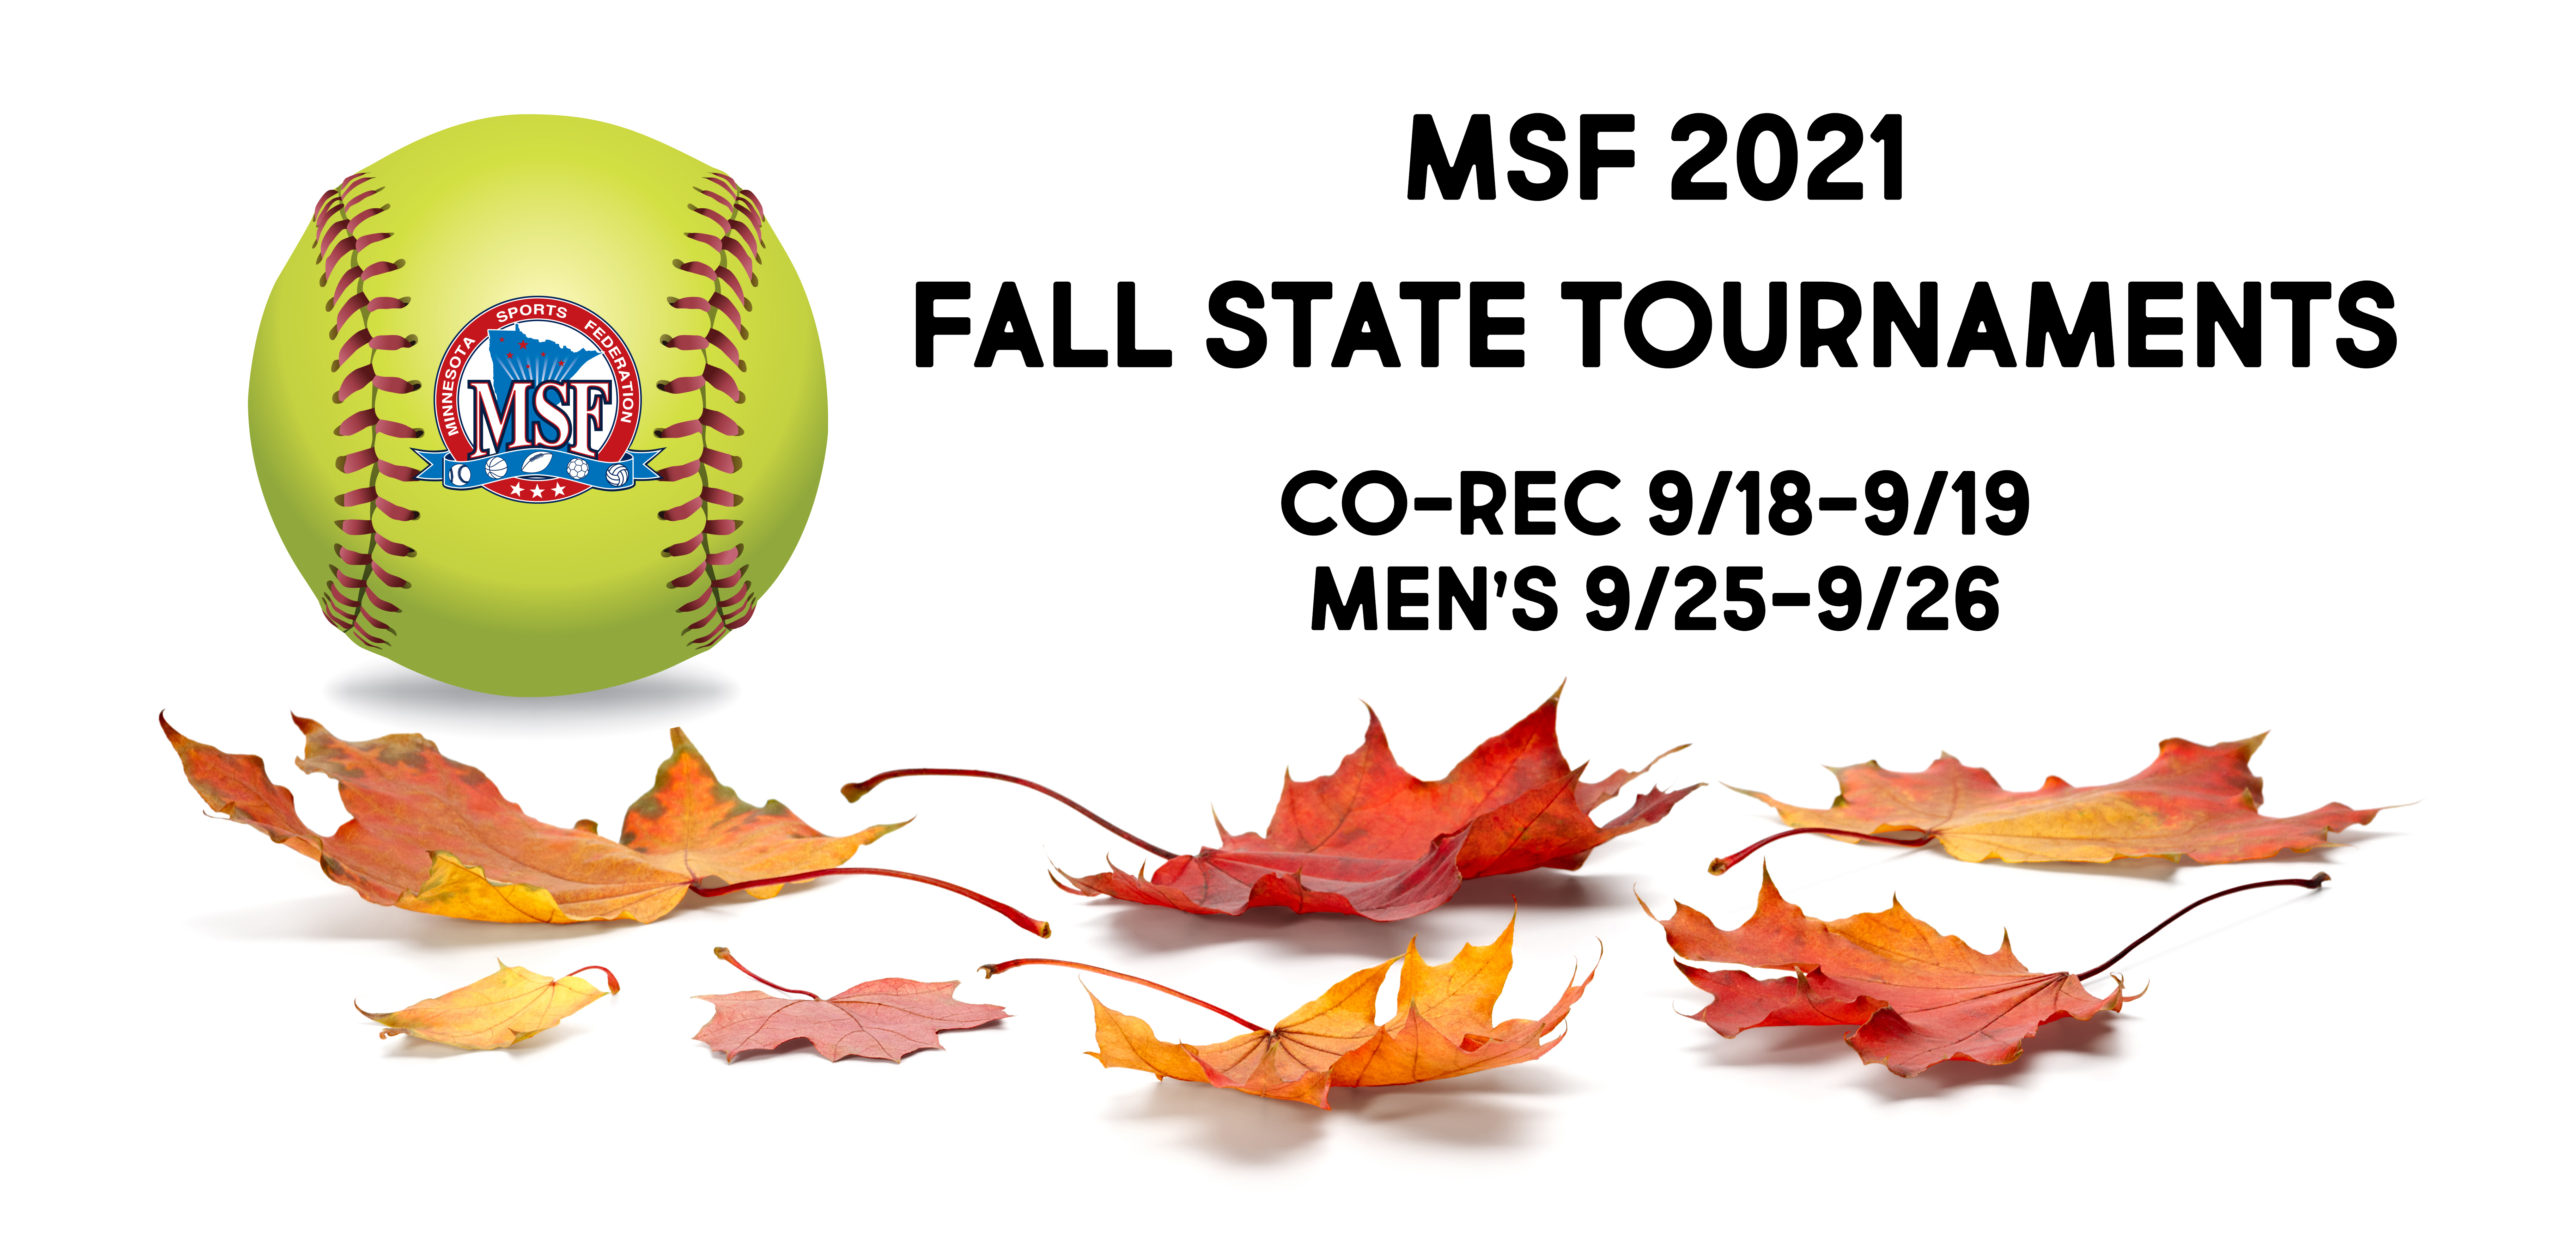 Adult Fall Softball Gets Underway This Weekend In Sauk Rapids